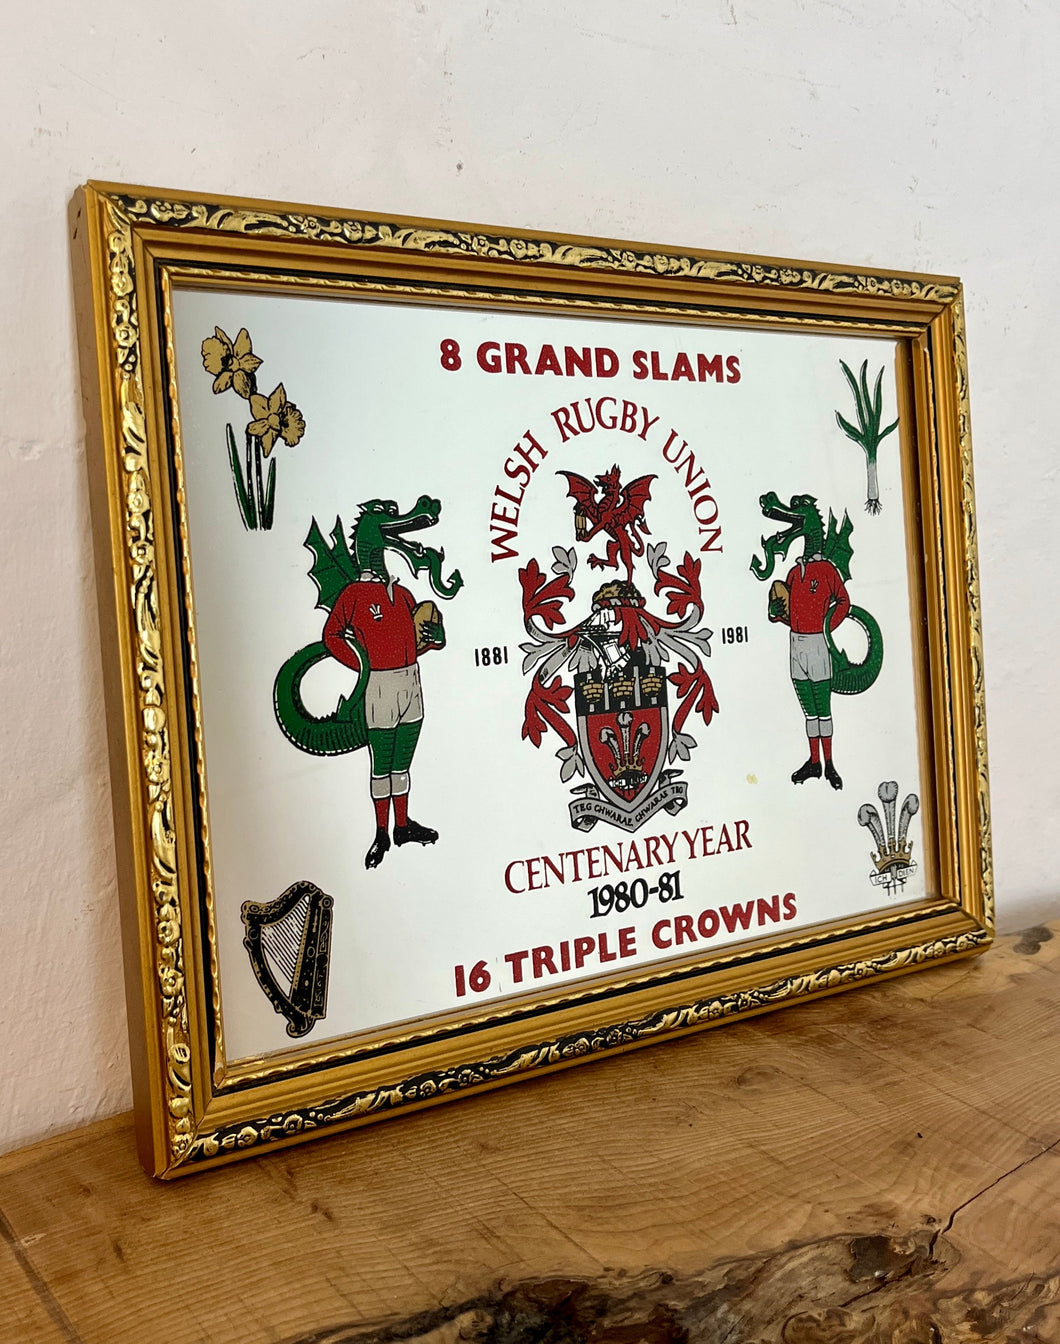 Featuring detailed Welsh plaque and pair of intricate Welsh dragons with vivid tones and Guinness harp logo, tradition Welsh icons including daffodils, leeks and triple feather and crown a nice rugby collectable.